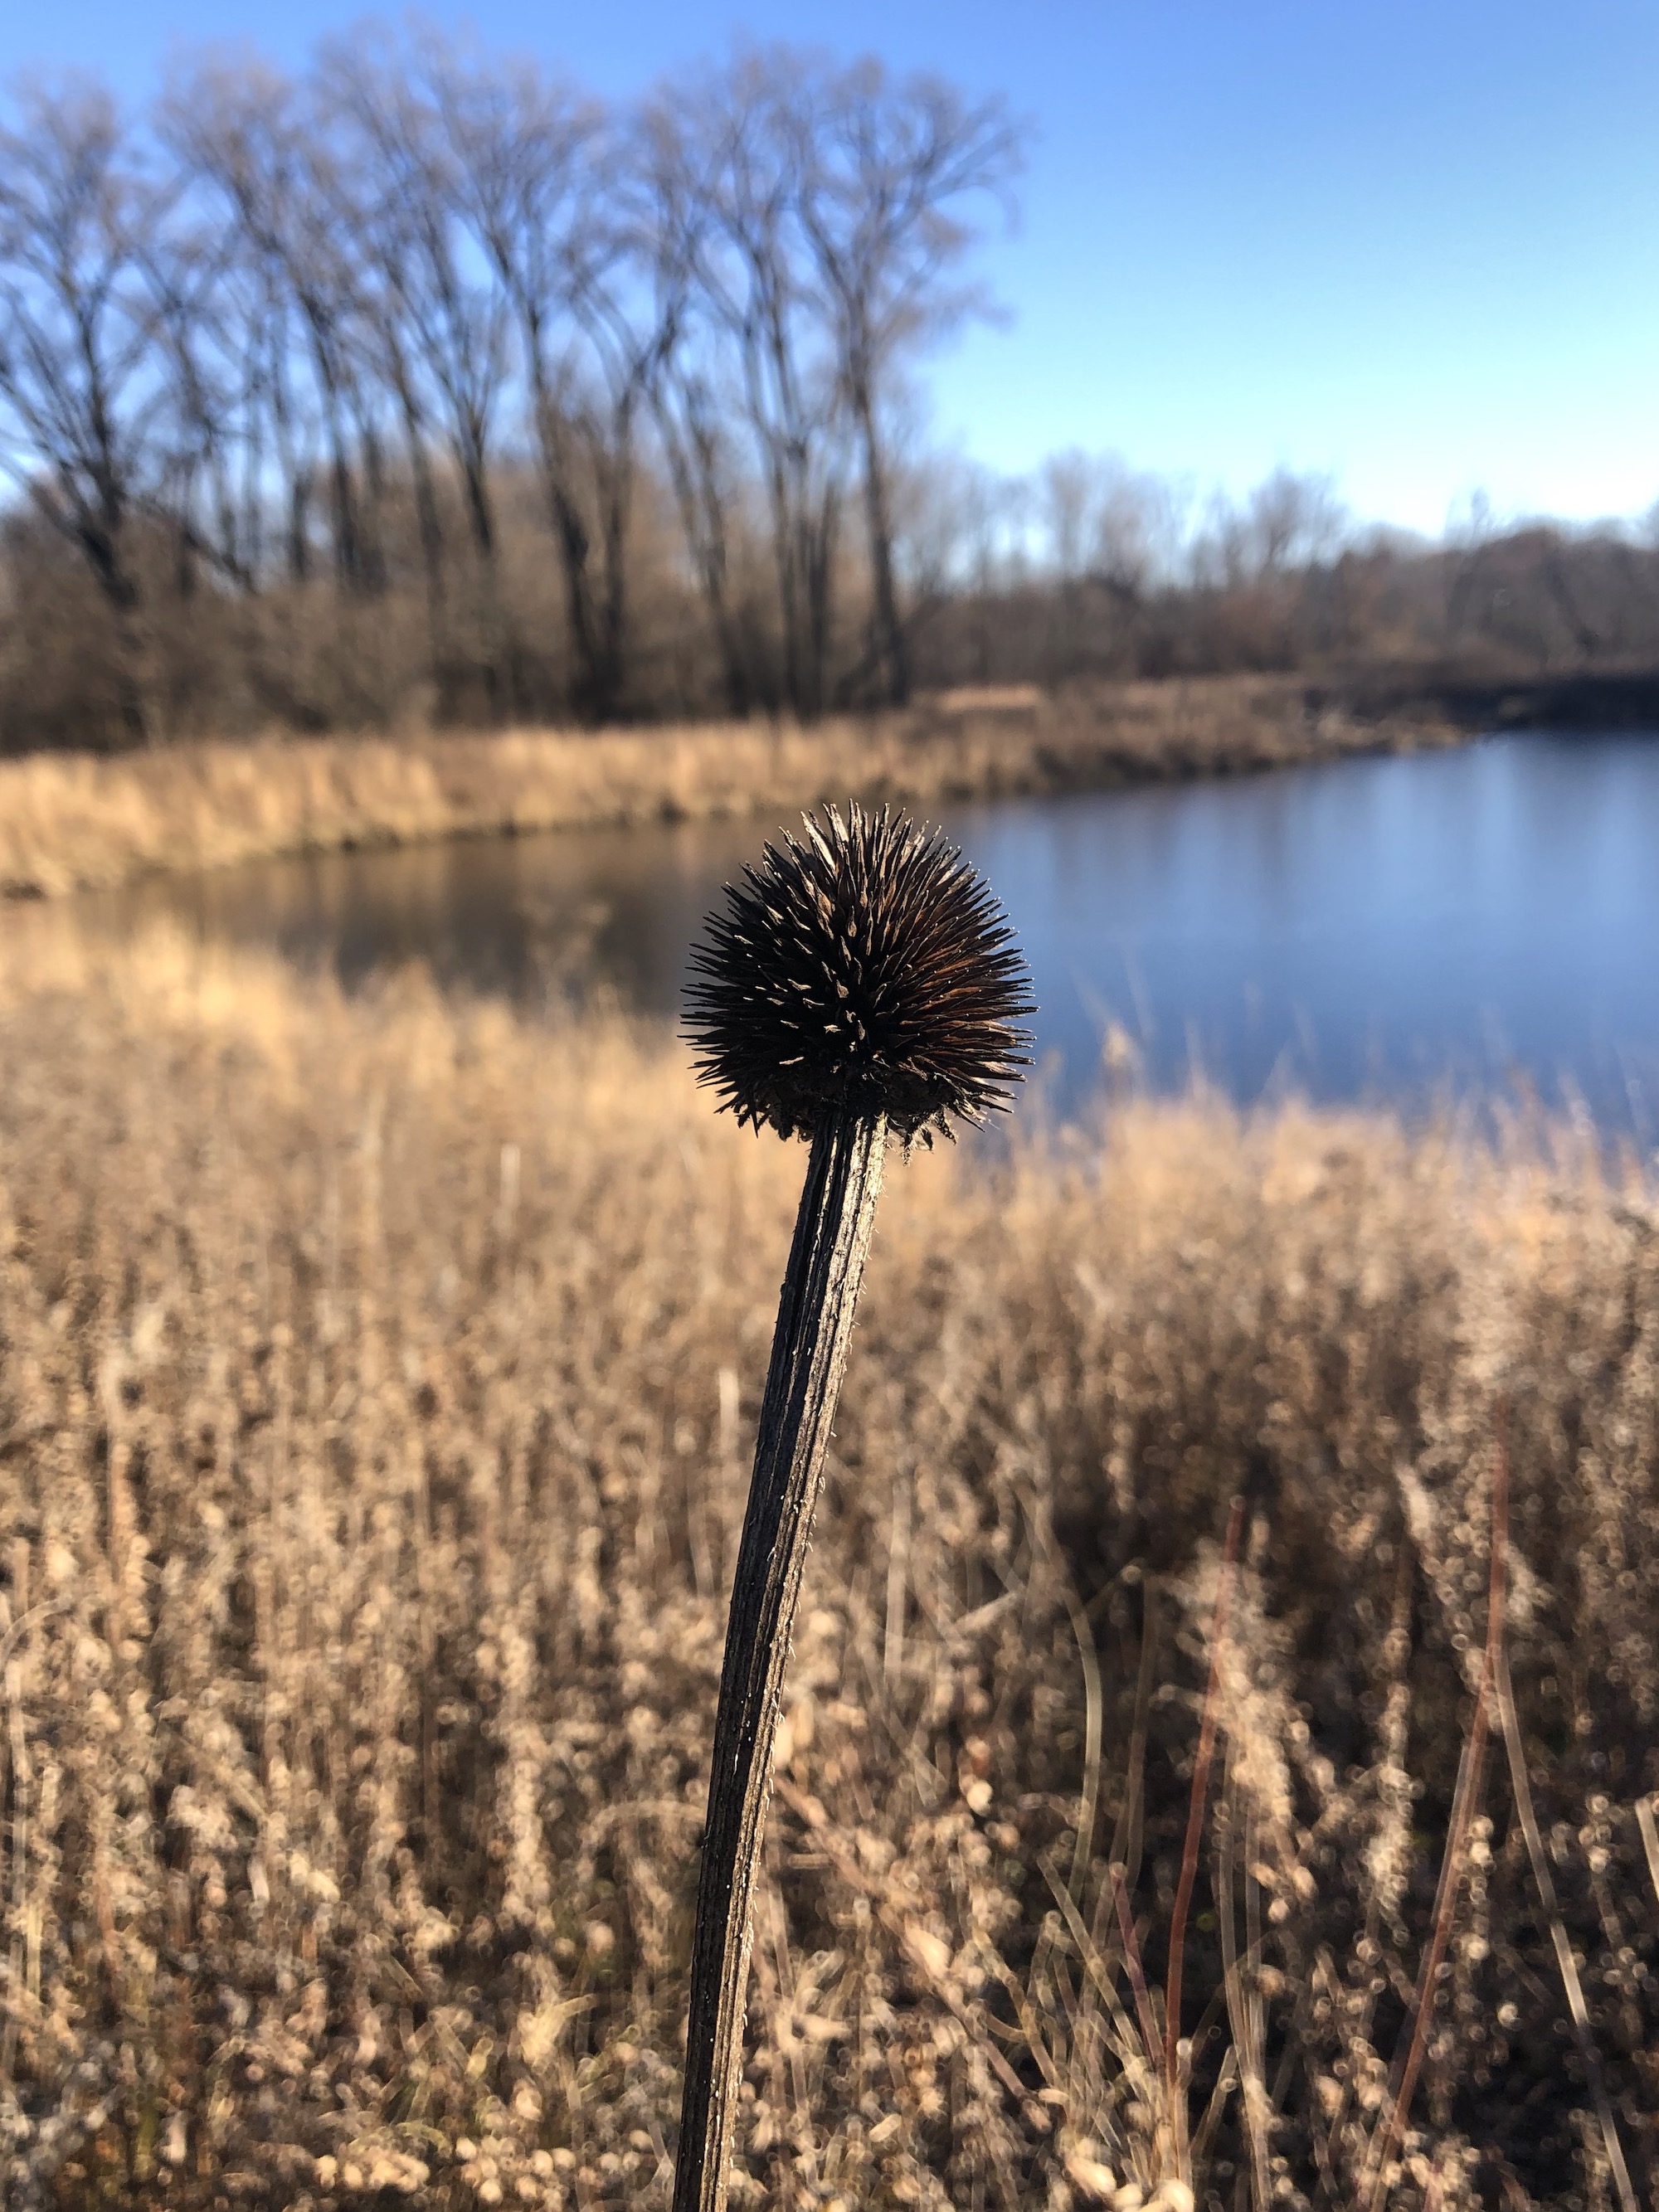 Pale purple coneflower on bank of Retaining Pond on corner of Nakoma Road and Manitou Way on November 28, 2021.